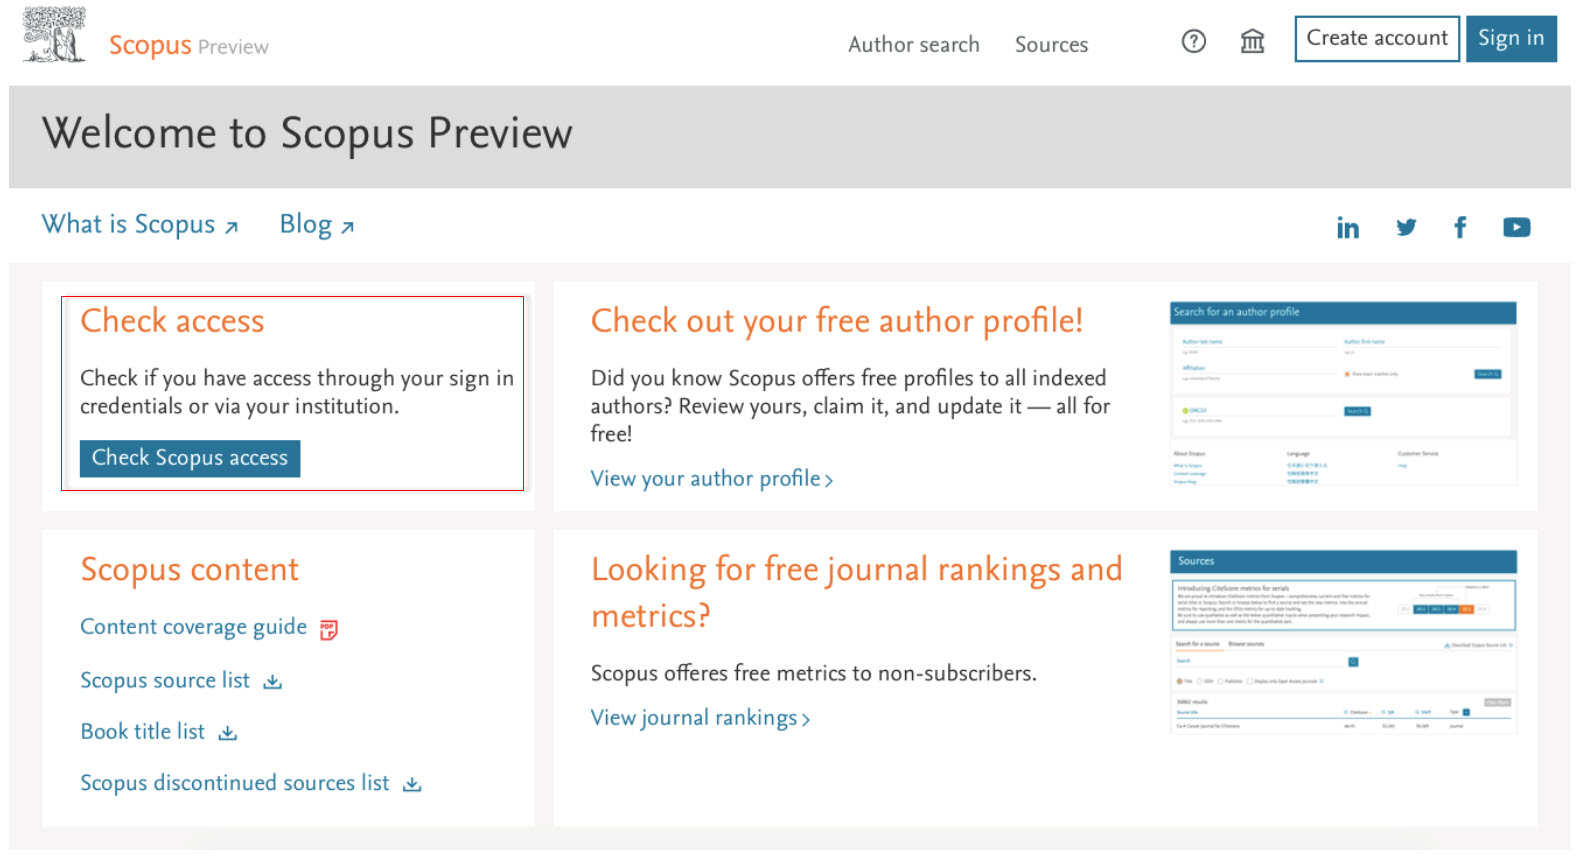 How do I access Scopus for free?